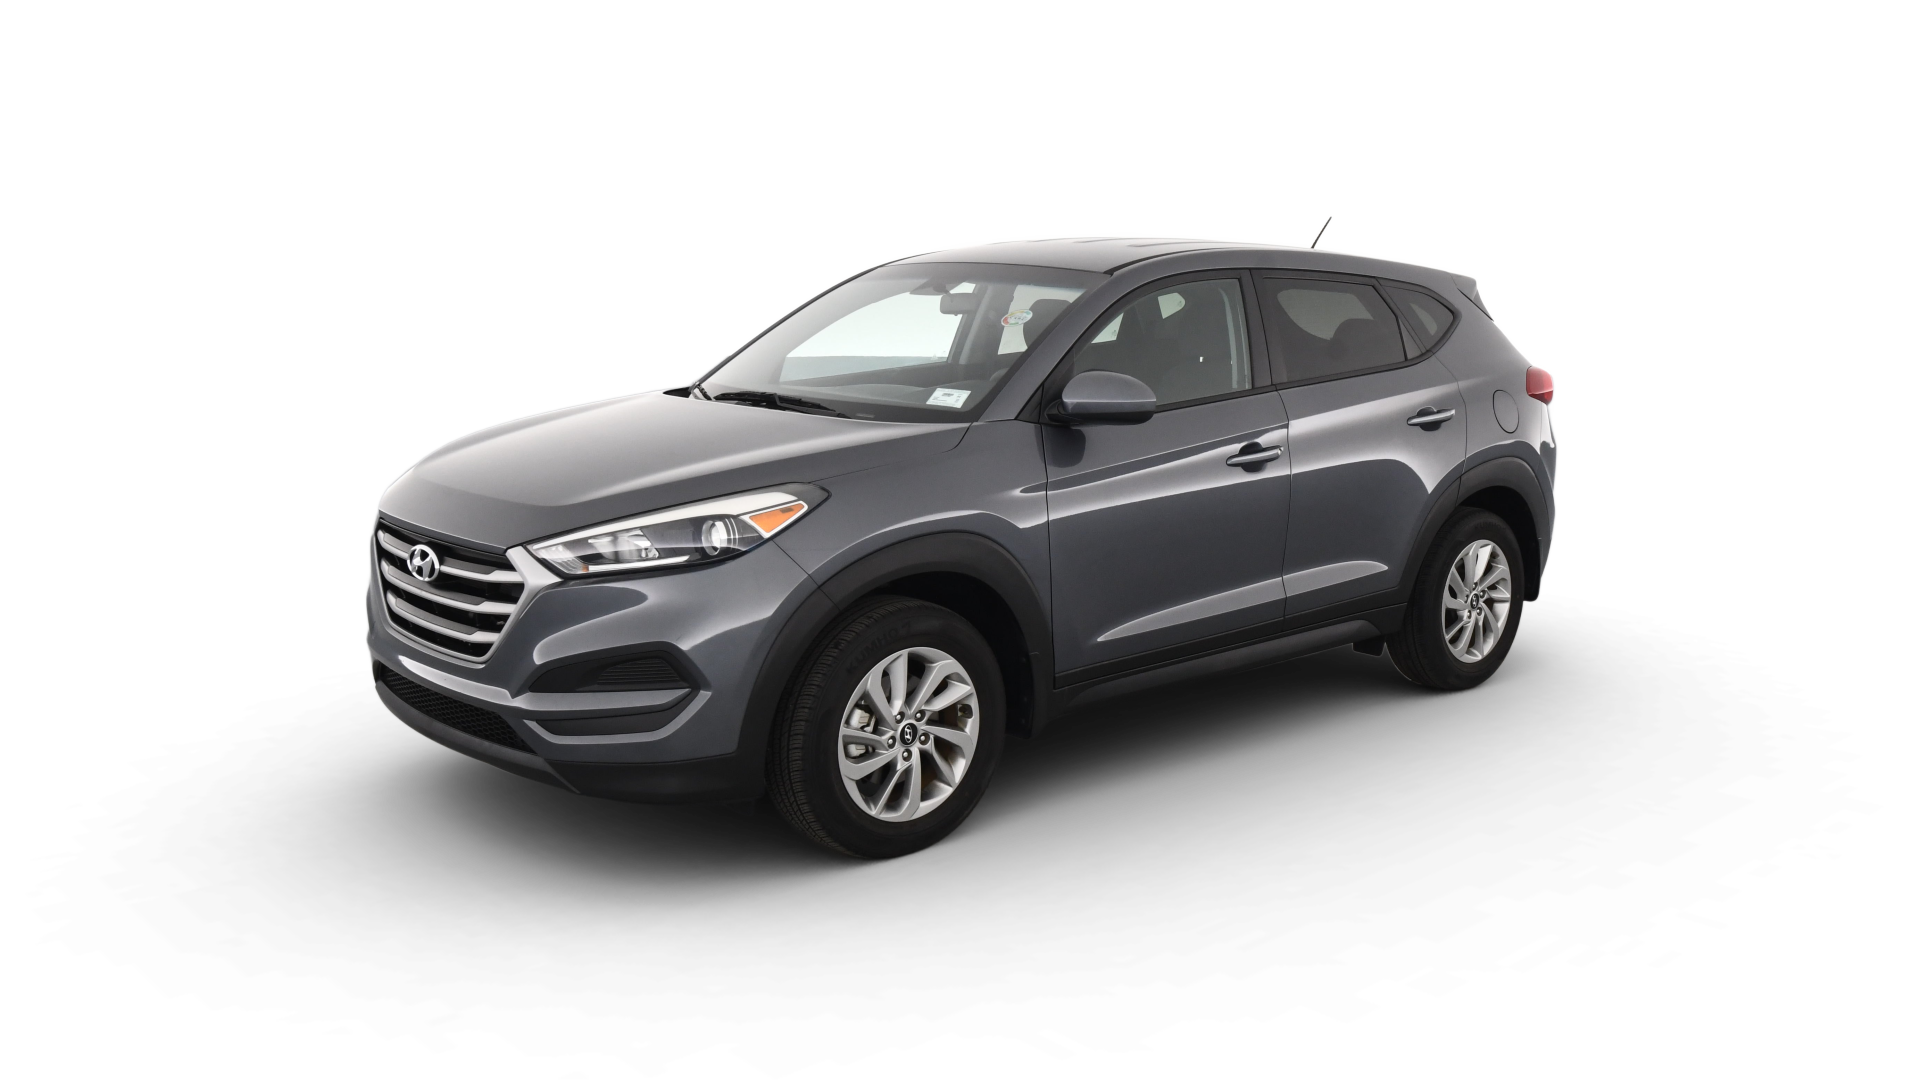 Used 2018 Hyundai Tucson for Sale Online